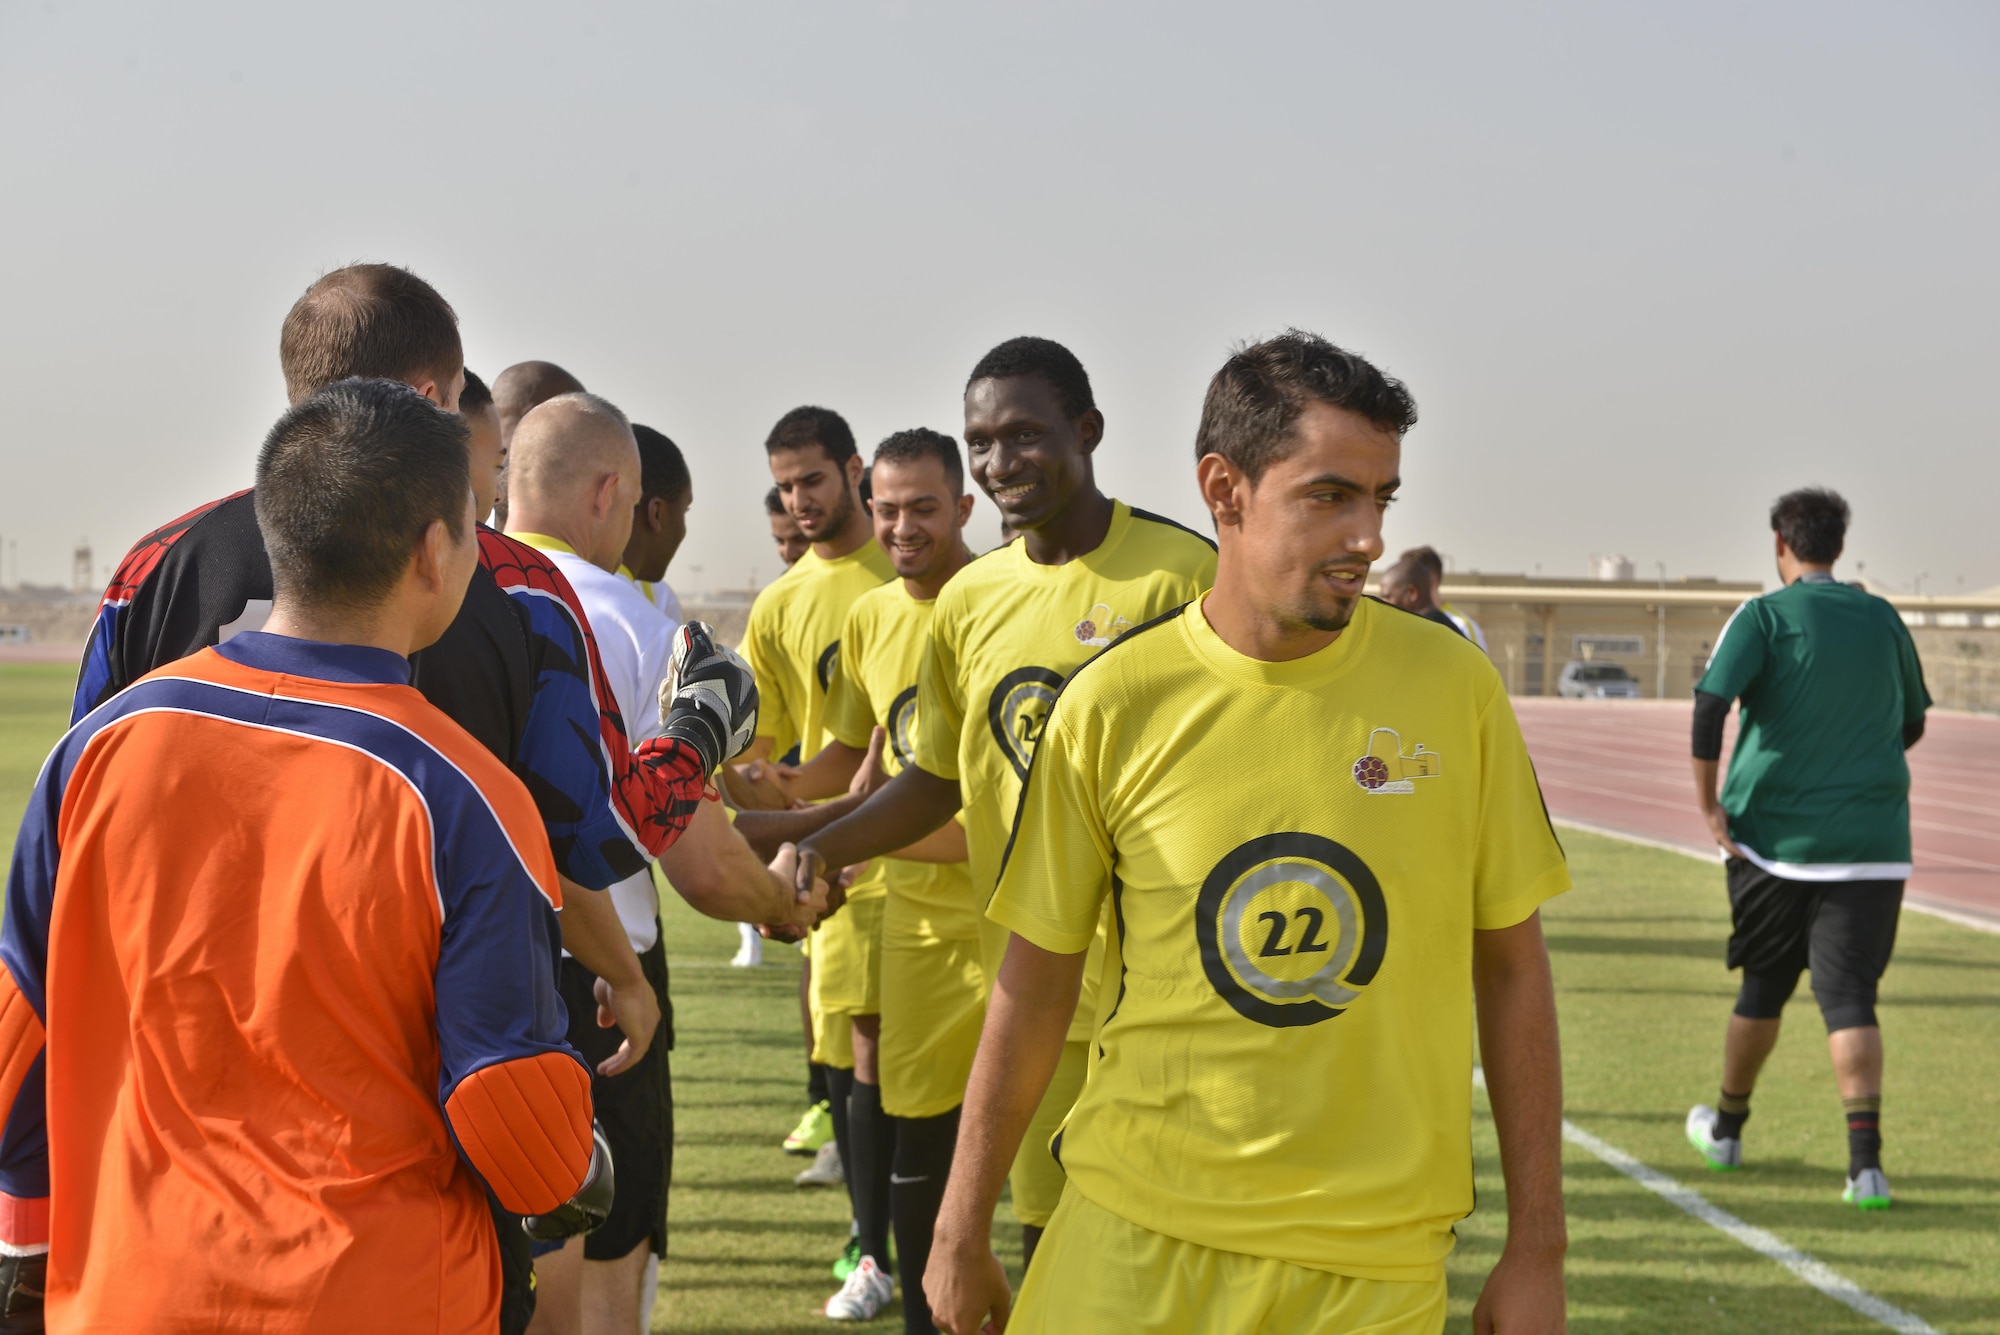 Deployed U.S. and Qatari military members shake hands prior to the start of a soccer match in celebration of the 240th U.S.  Army birthday June 14, 2015 at Al Udeid Air Base, Qatar. AUAB All-Stars planned a soccer match to help strengthen the partnership between the U.S. and Qatari military and build friendships between service members. (U.S. Air Force photo/Staff Sgt. Alexandre Montes)